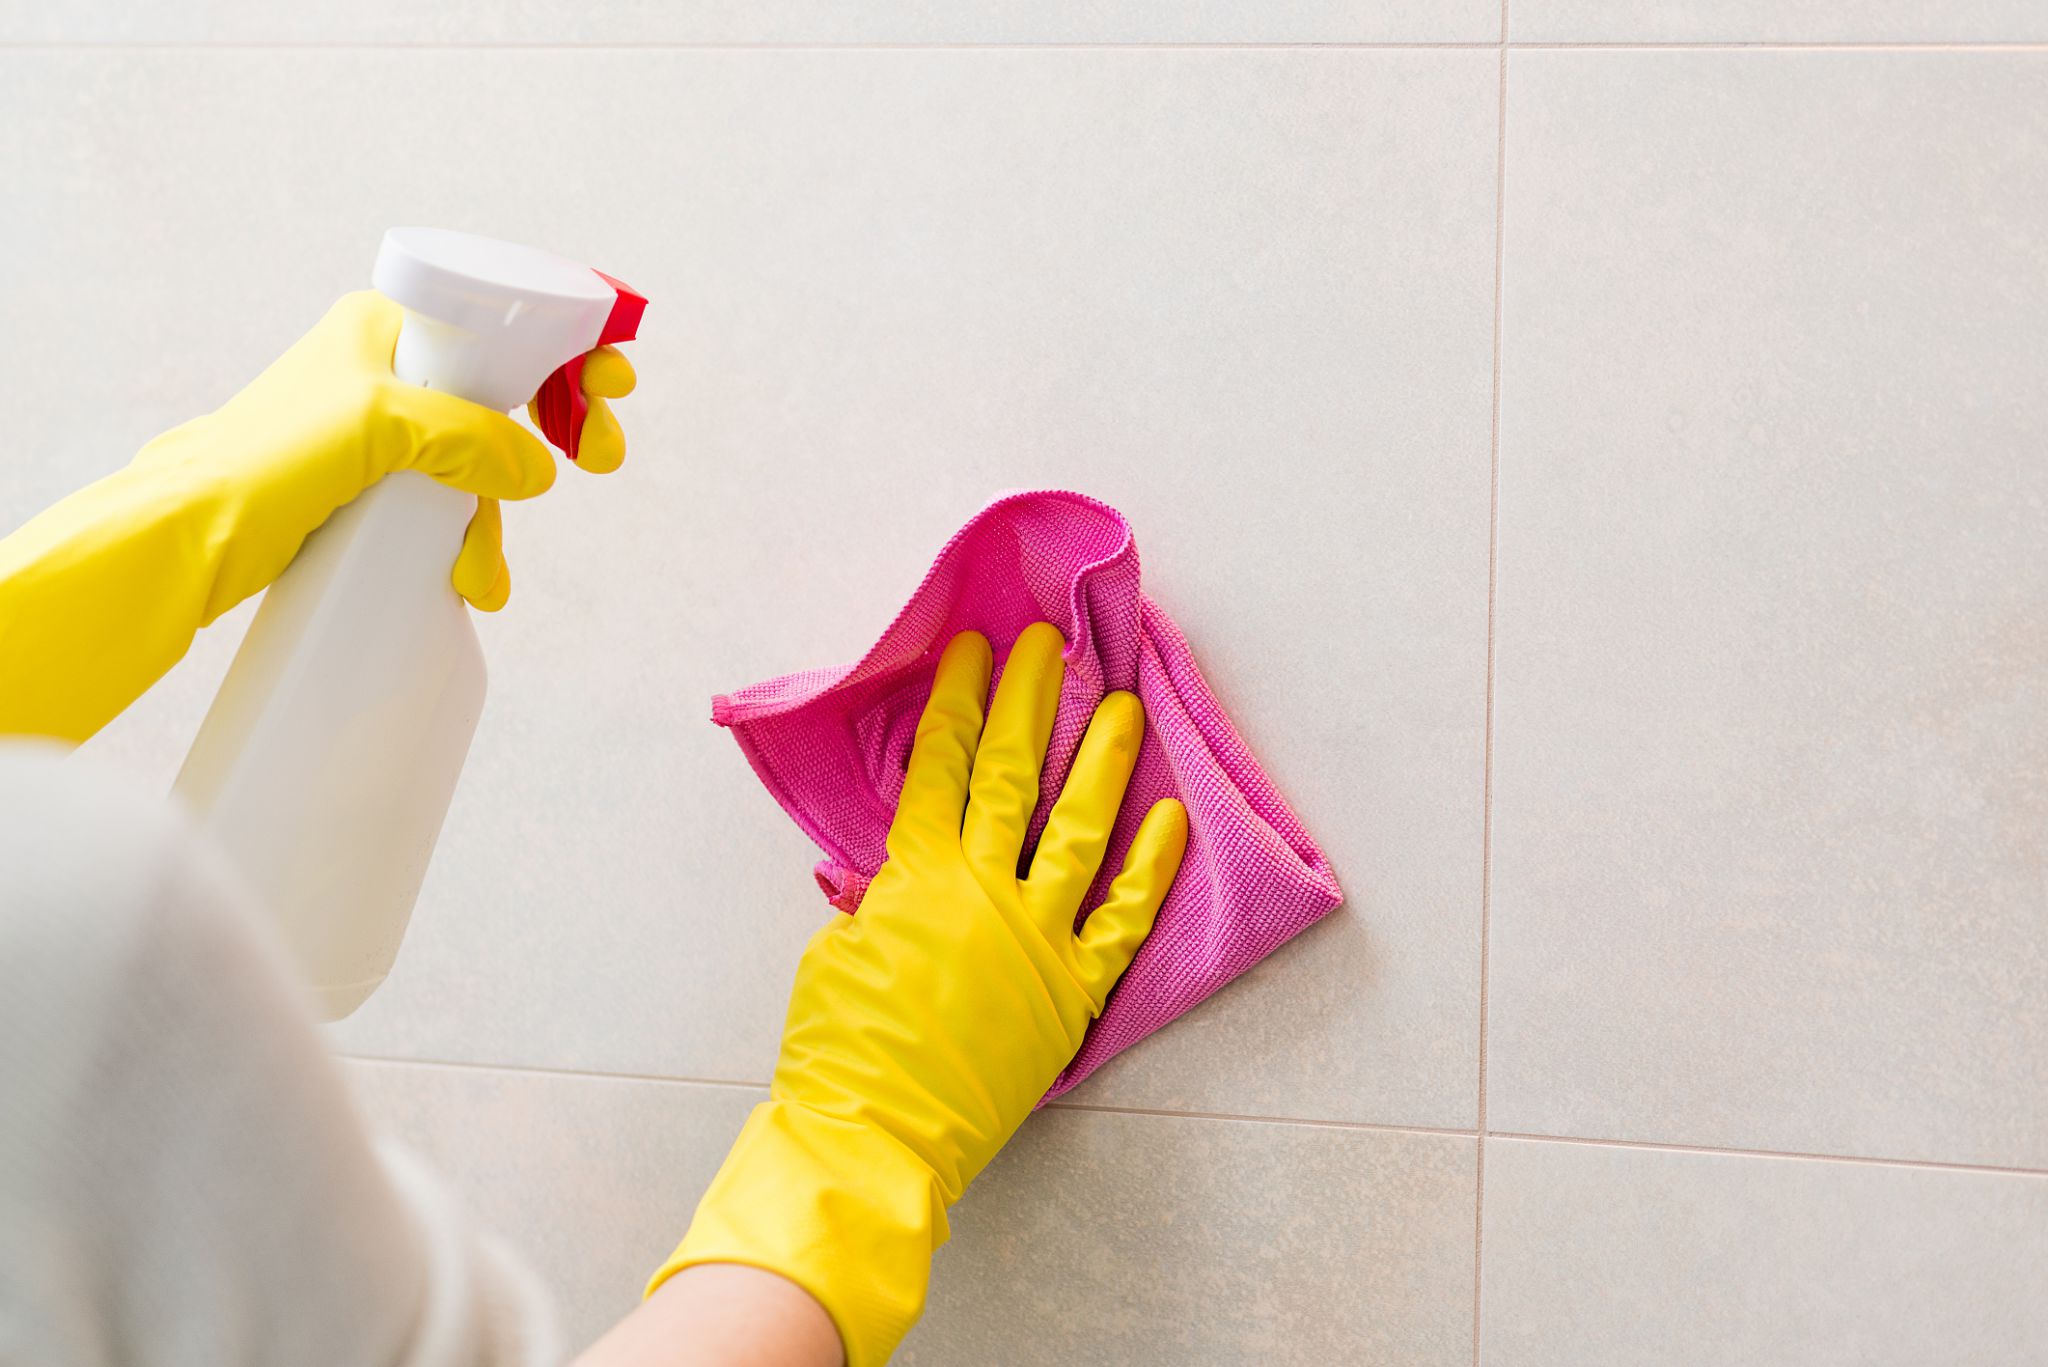 Hands with yellow rubber gloves holding detergent spray bottle and cleaning tiles in bathroom with pink cloth. Spring cleaning